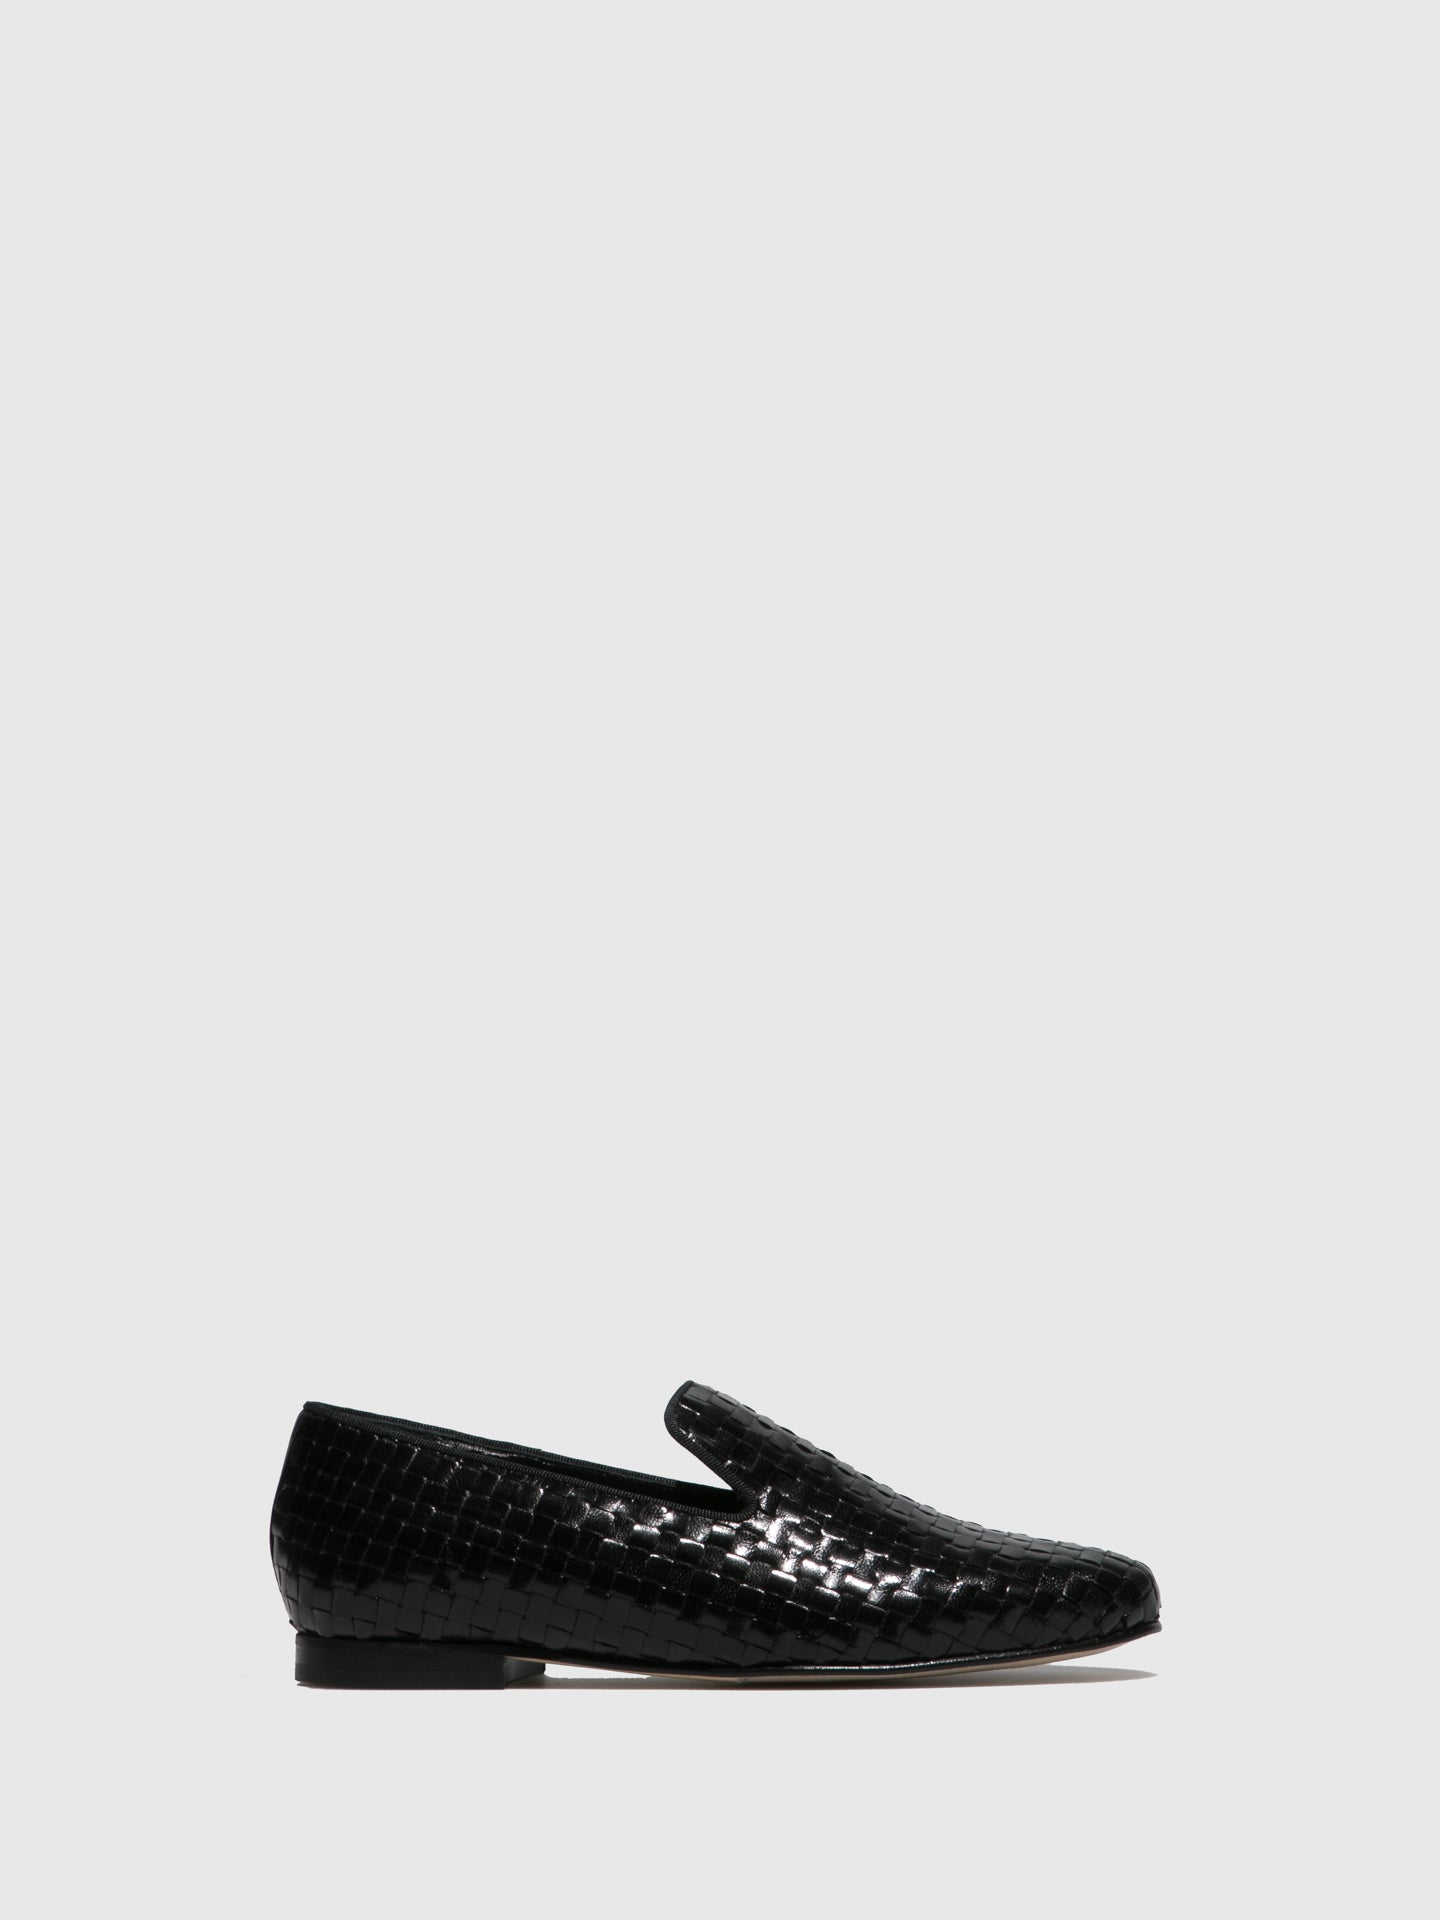 JJ Heitor Black Leather Loafers Shoes